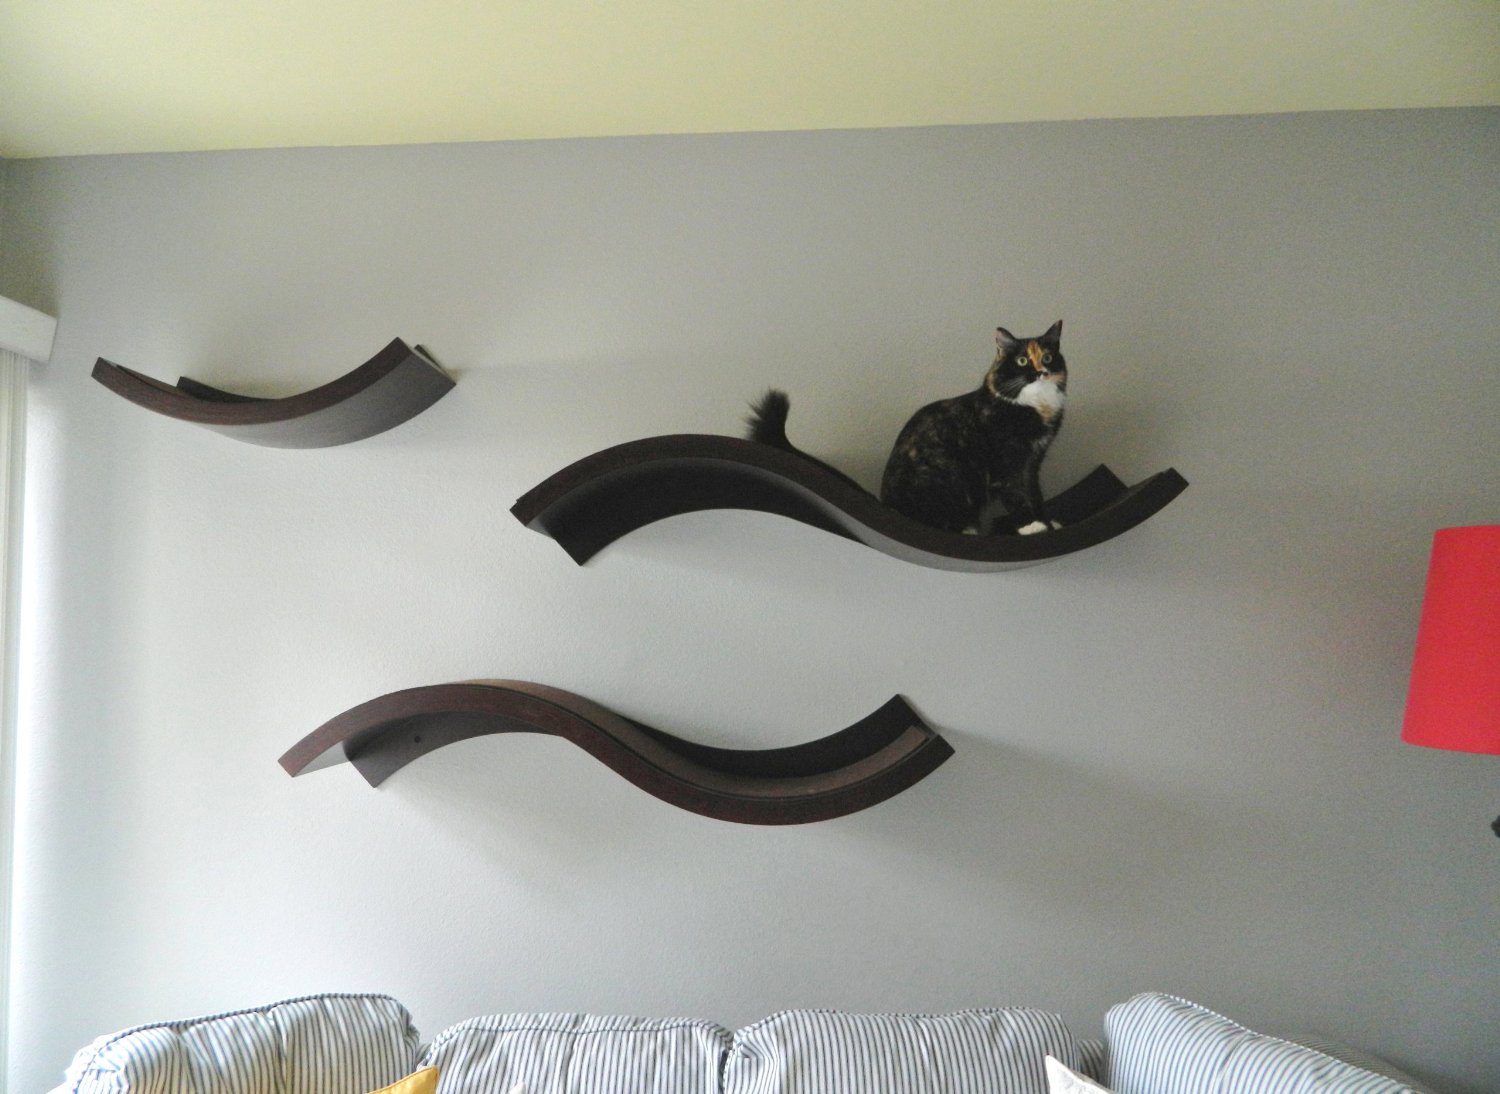 Is Pet Haus Wave Wall Mounted Cat Perch Worth Buying